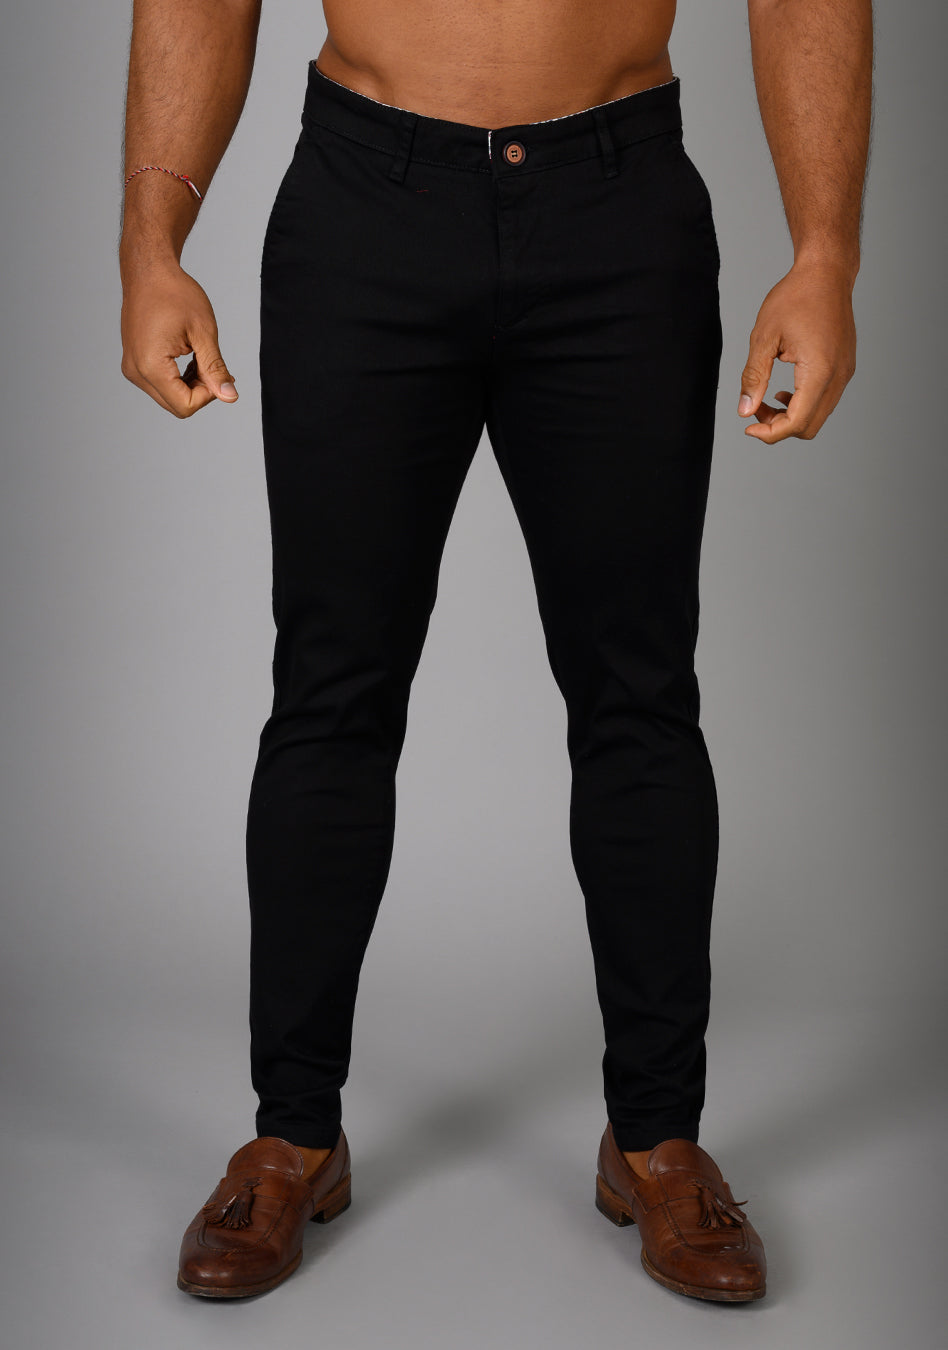 Oxcloth Black Muscle fit chinos offering a perfect blend of comfort and style for well-built physiques, with a contoured waist and athletic fit design for an on-trend appearance.